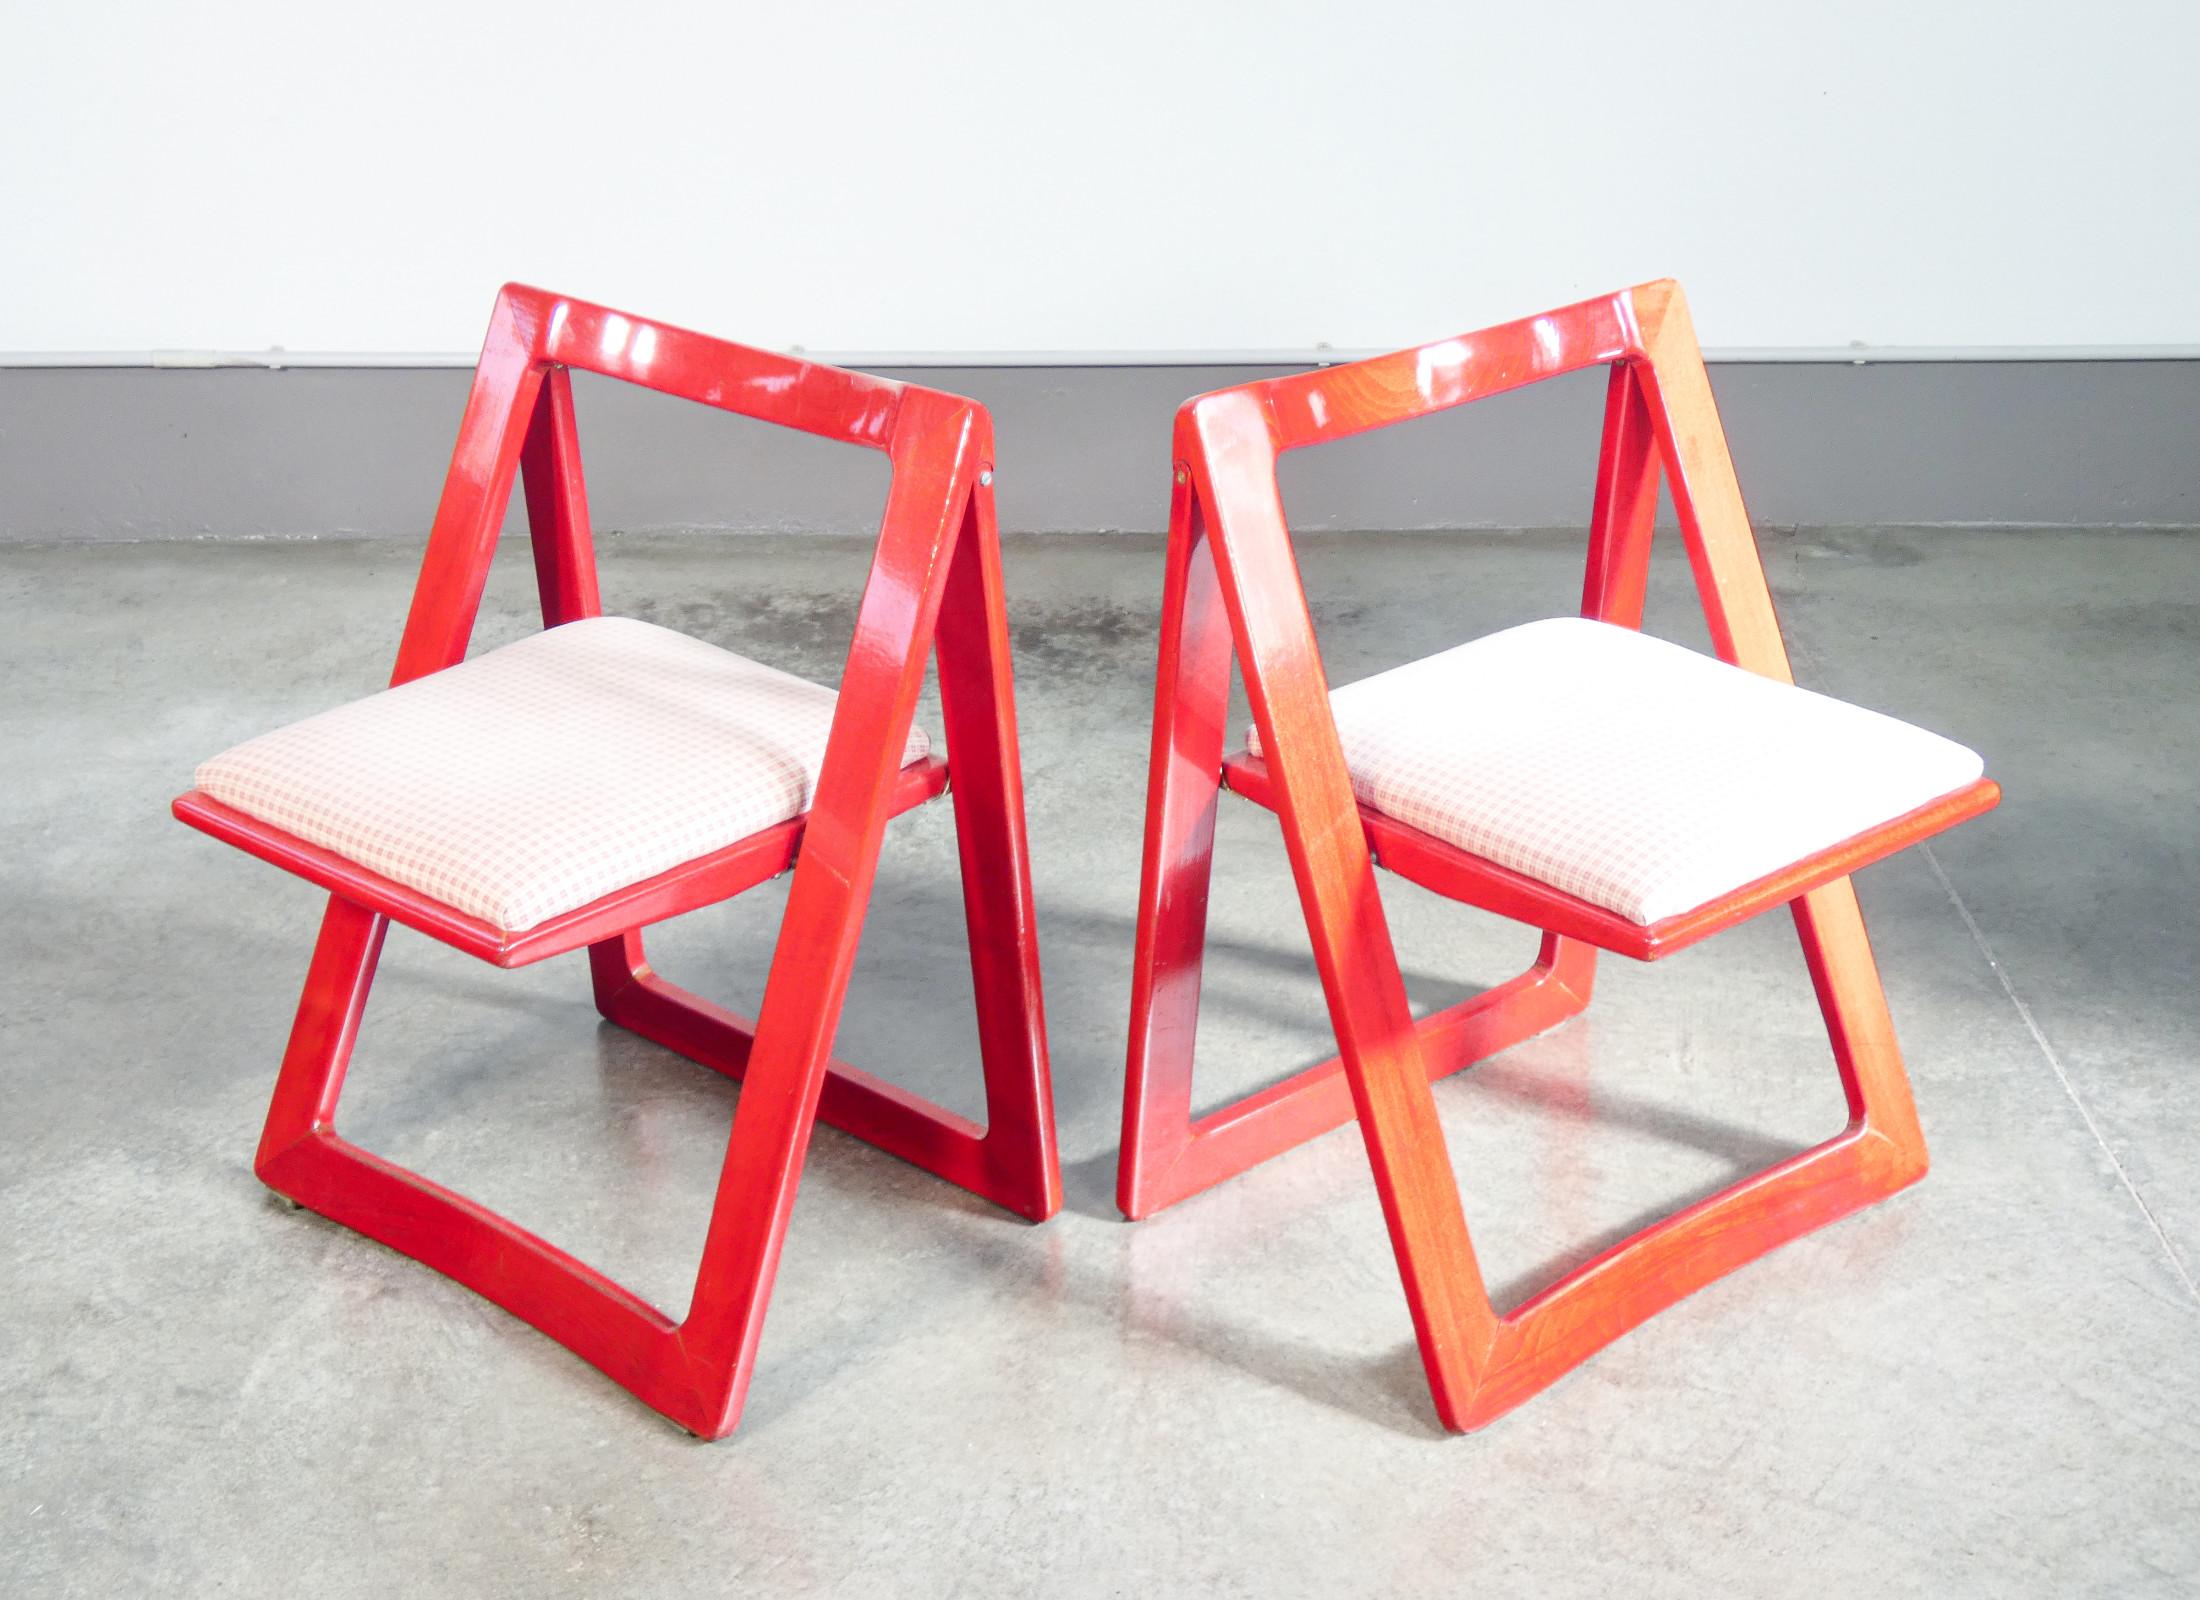 Set of four TRIESTE chairs, designed by D'ANIELLO & JACOBER for BAZZANI, red. '66 For Sale 3